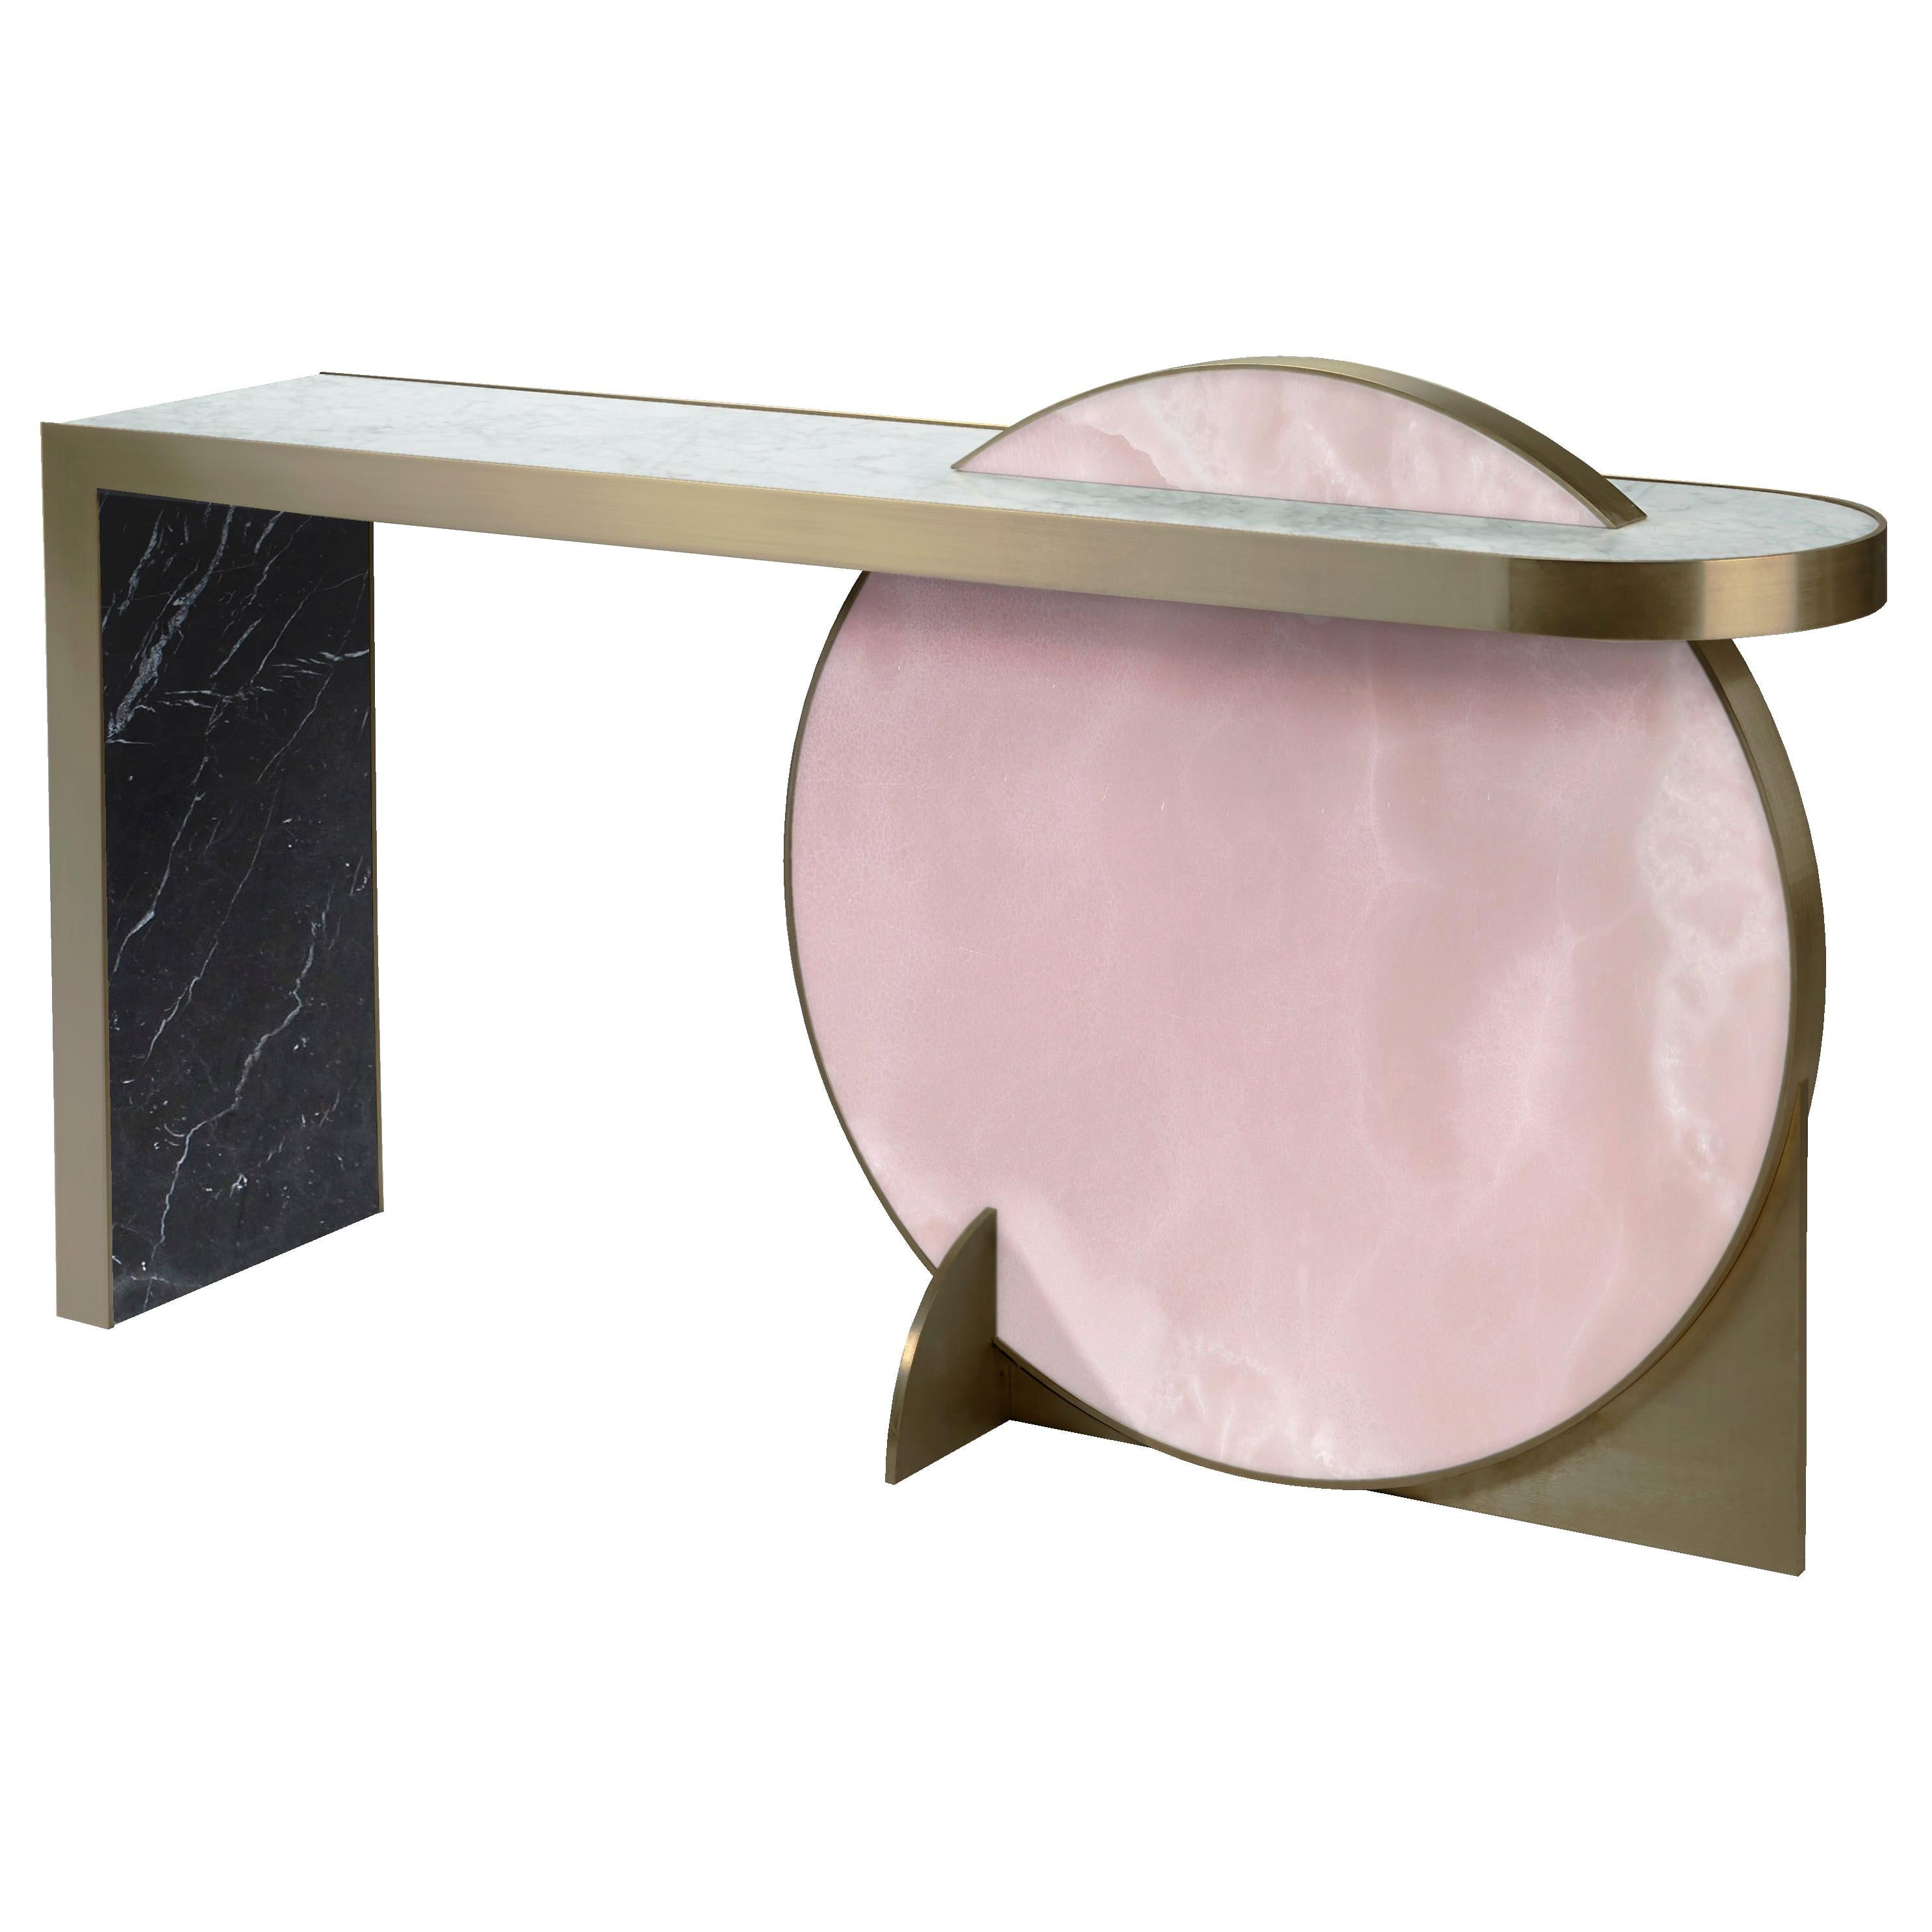 The Collision Console Carrara Marble and Brushed Brass, Onyx, by Lara Bohinc